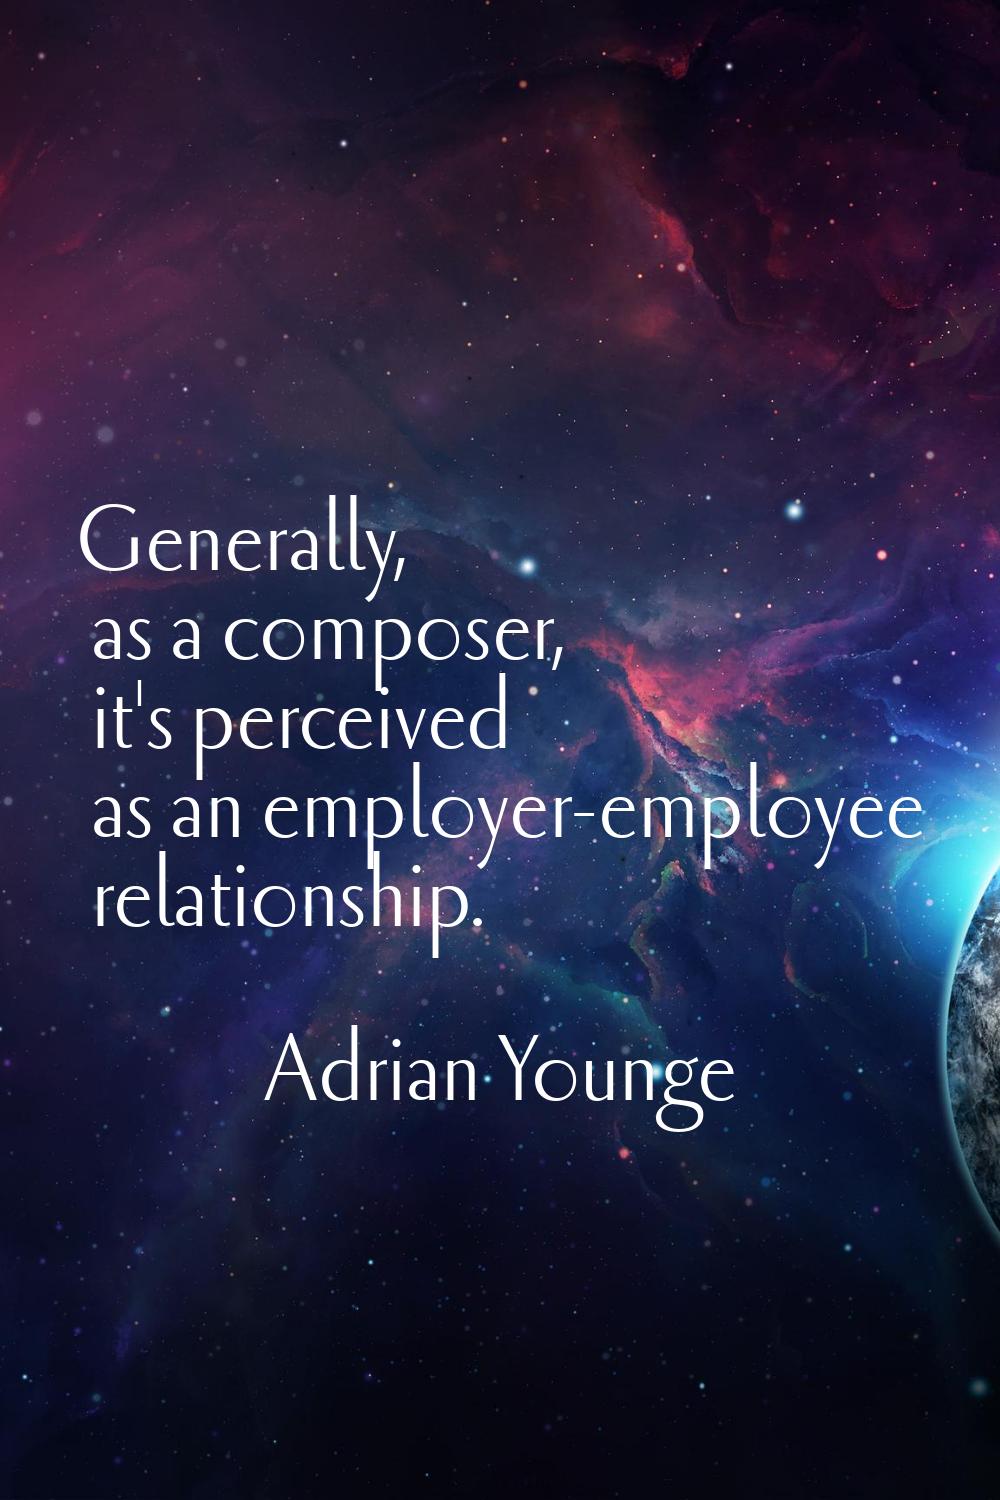 Generally, as a composer, it's perceived as an employer-employee relationship.